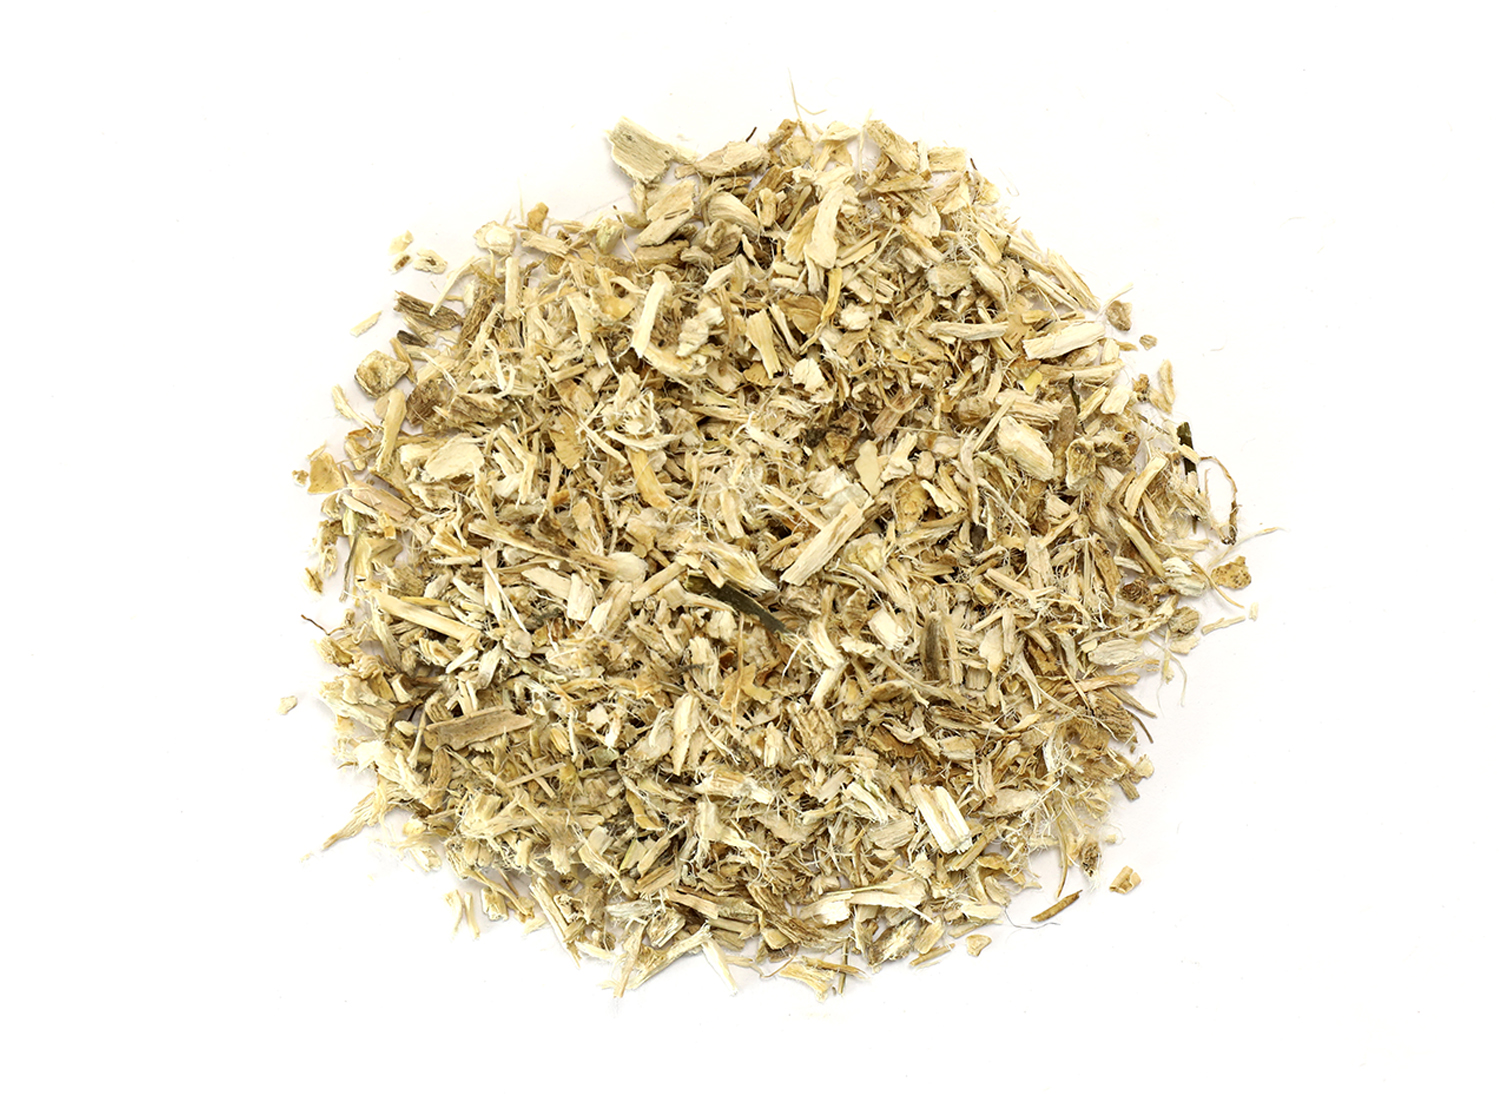 Dried Leaves & Herbs- Manufacturer, Supplier in India